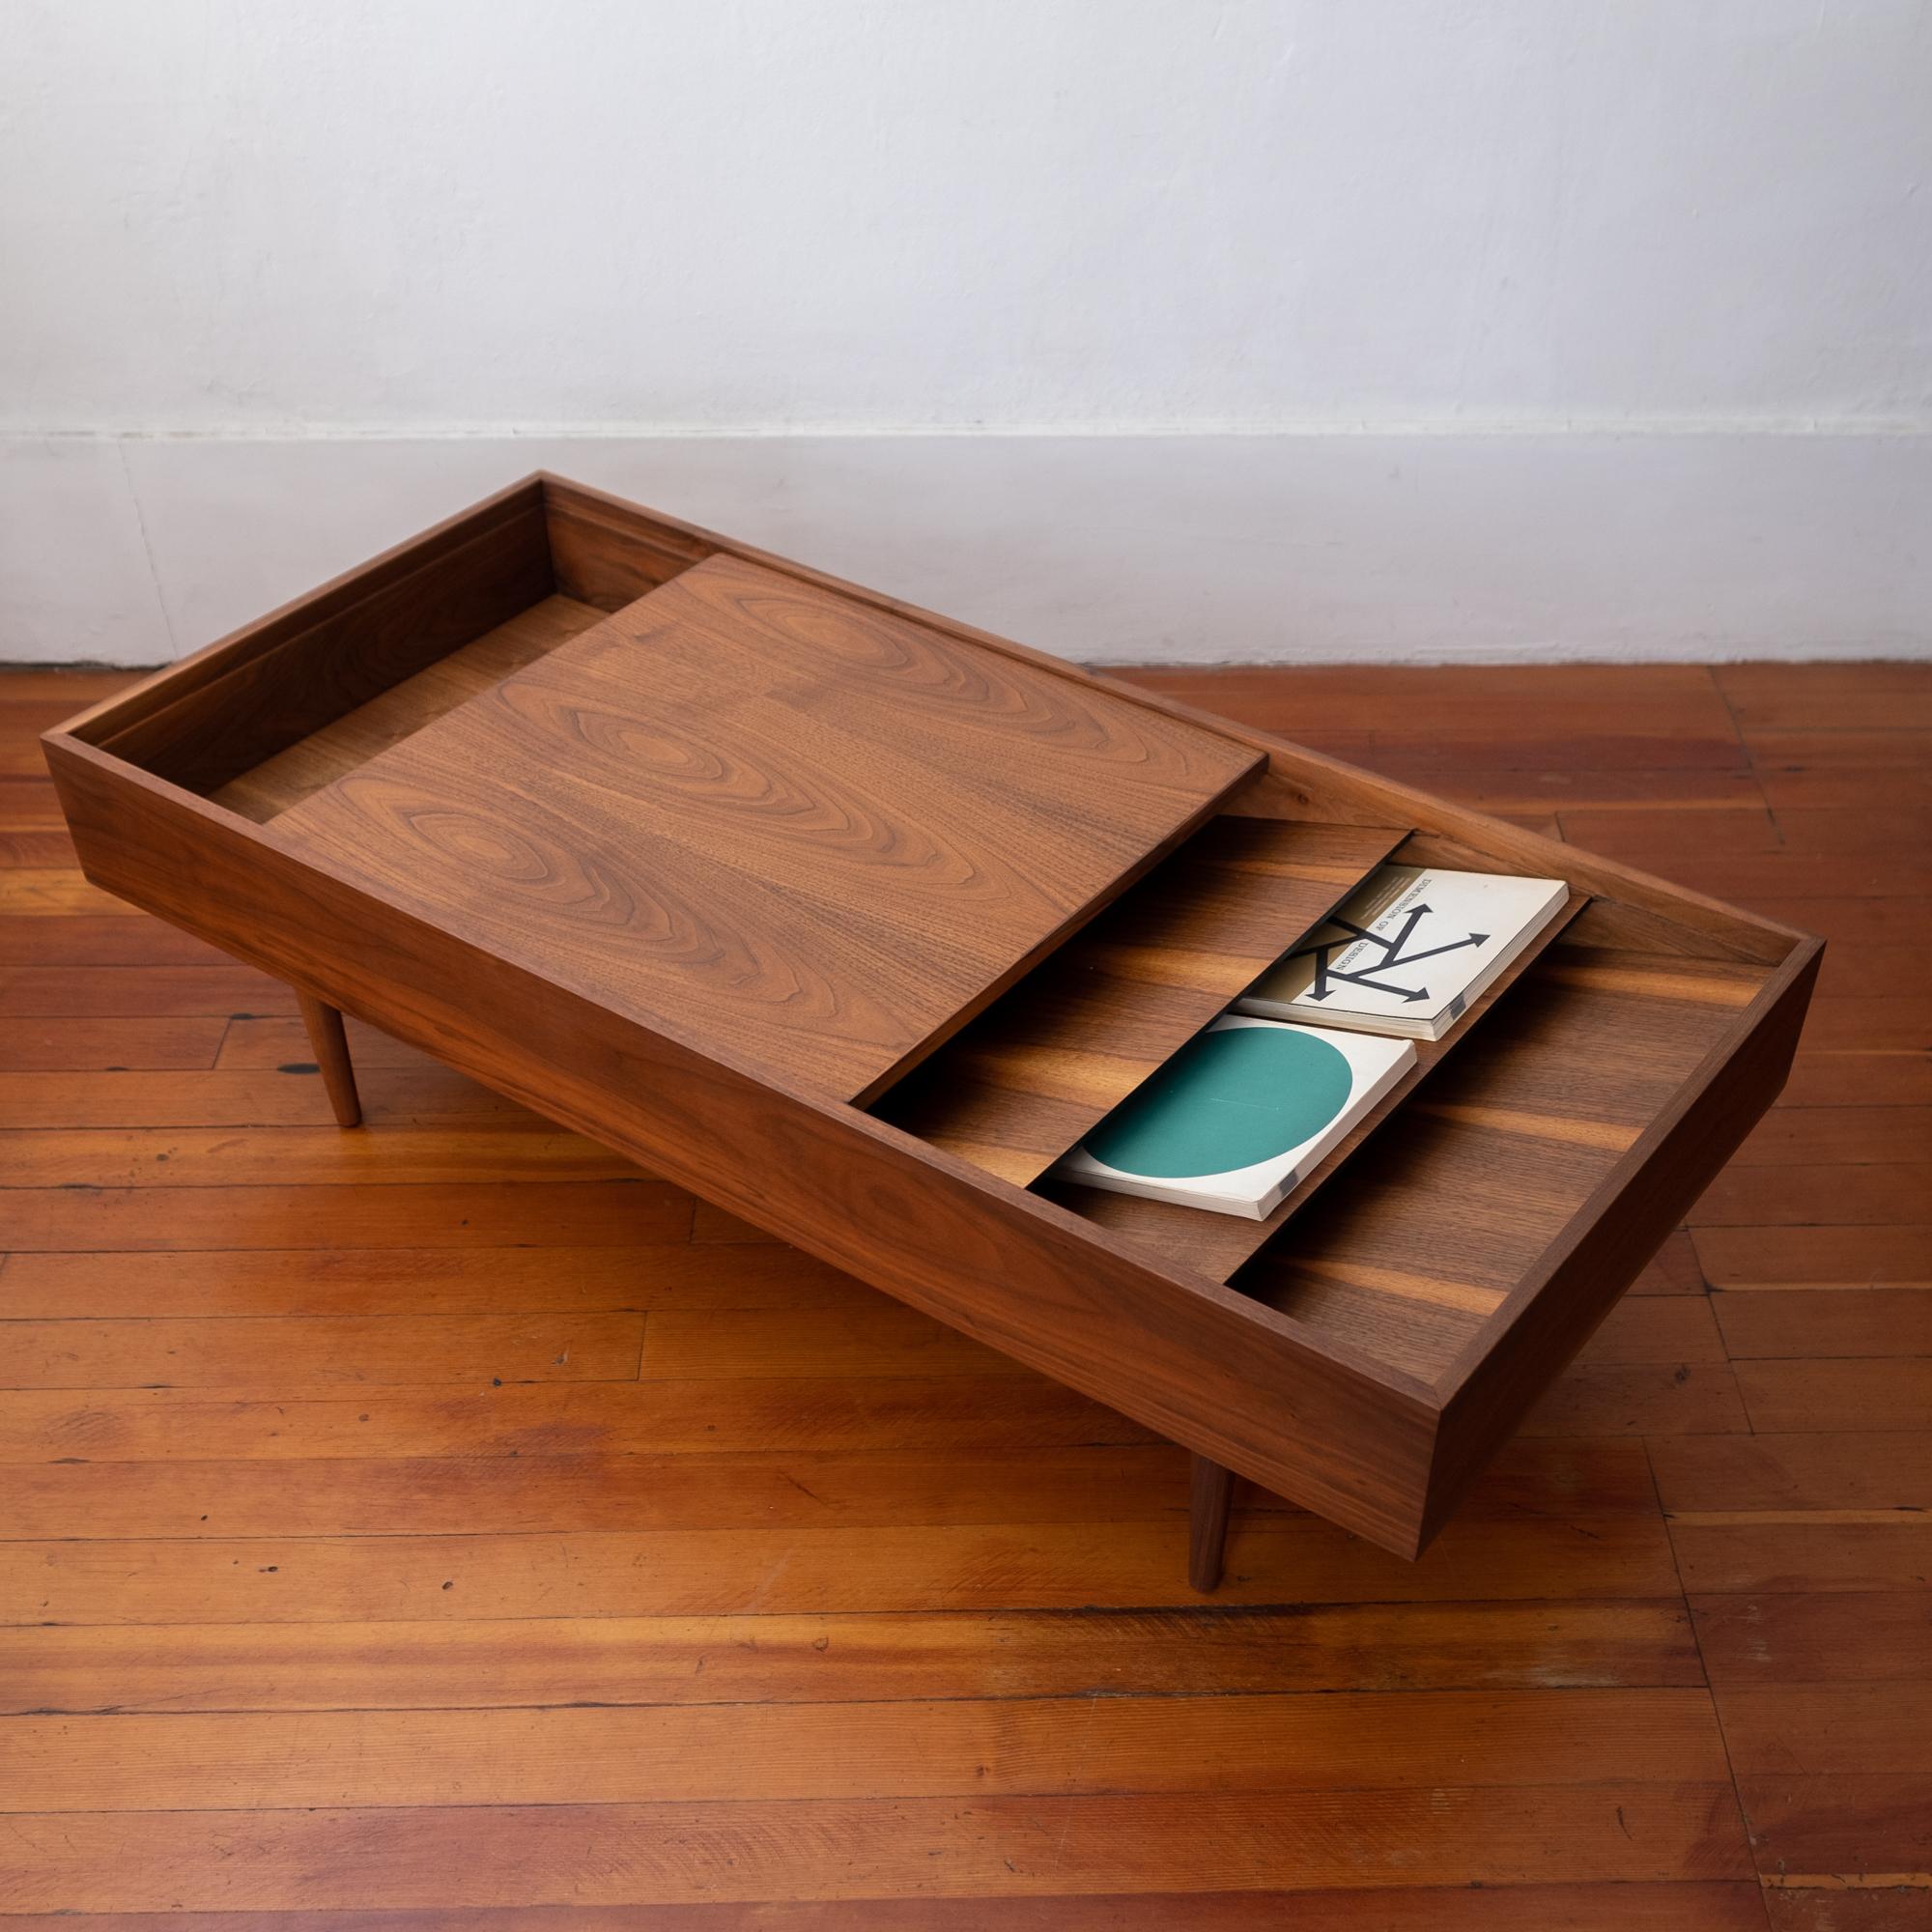 Walnut coffee table by Milo Baughman for Glenn of California. One side is for magazines and the other side reveals a divided storage area. The top can slide to cover either side.
  